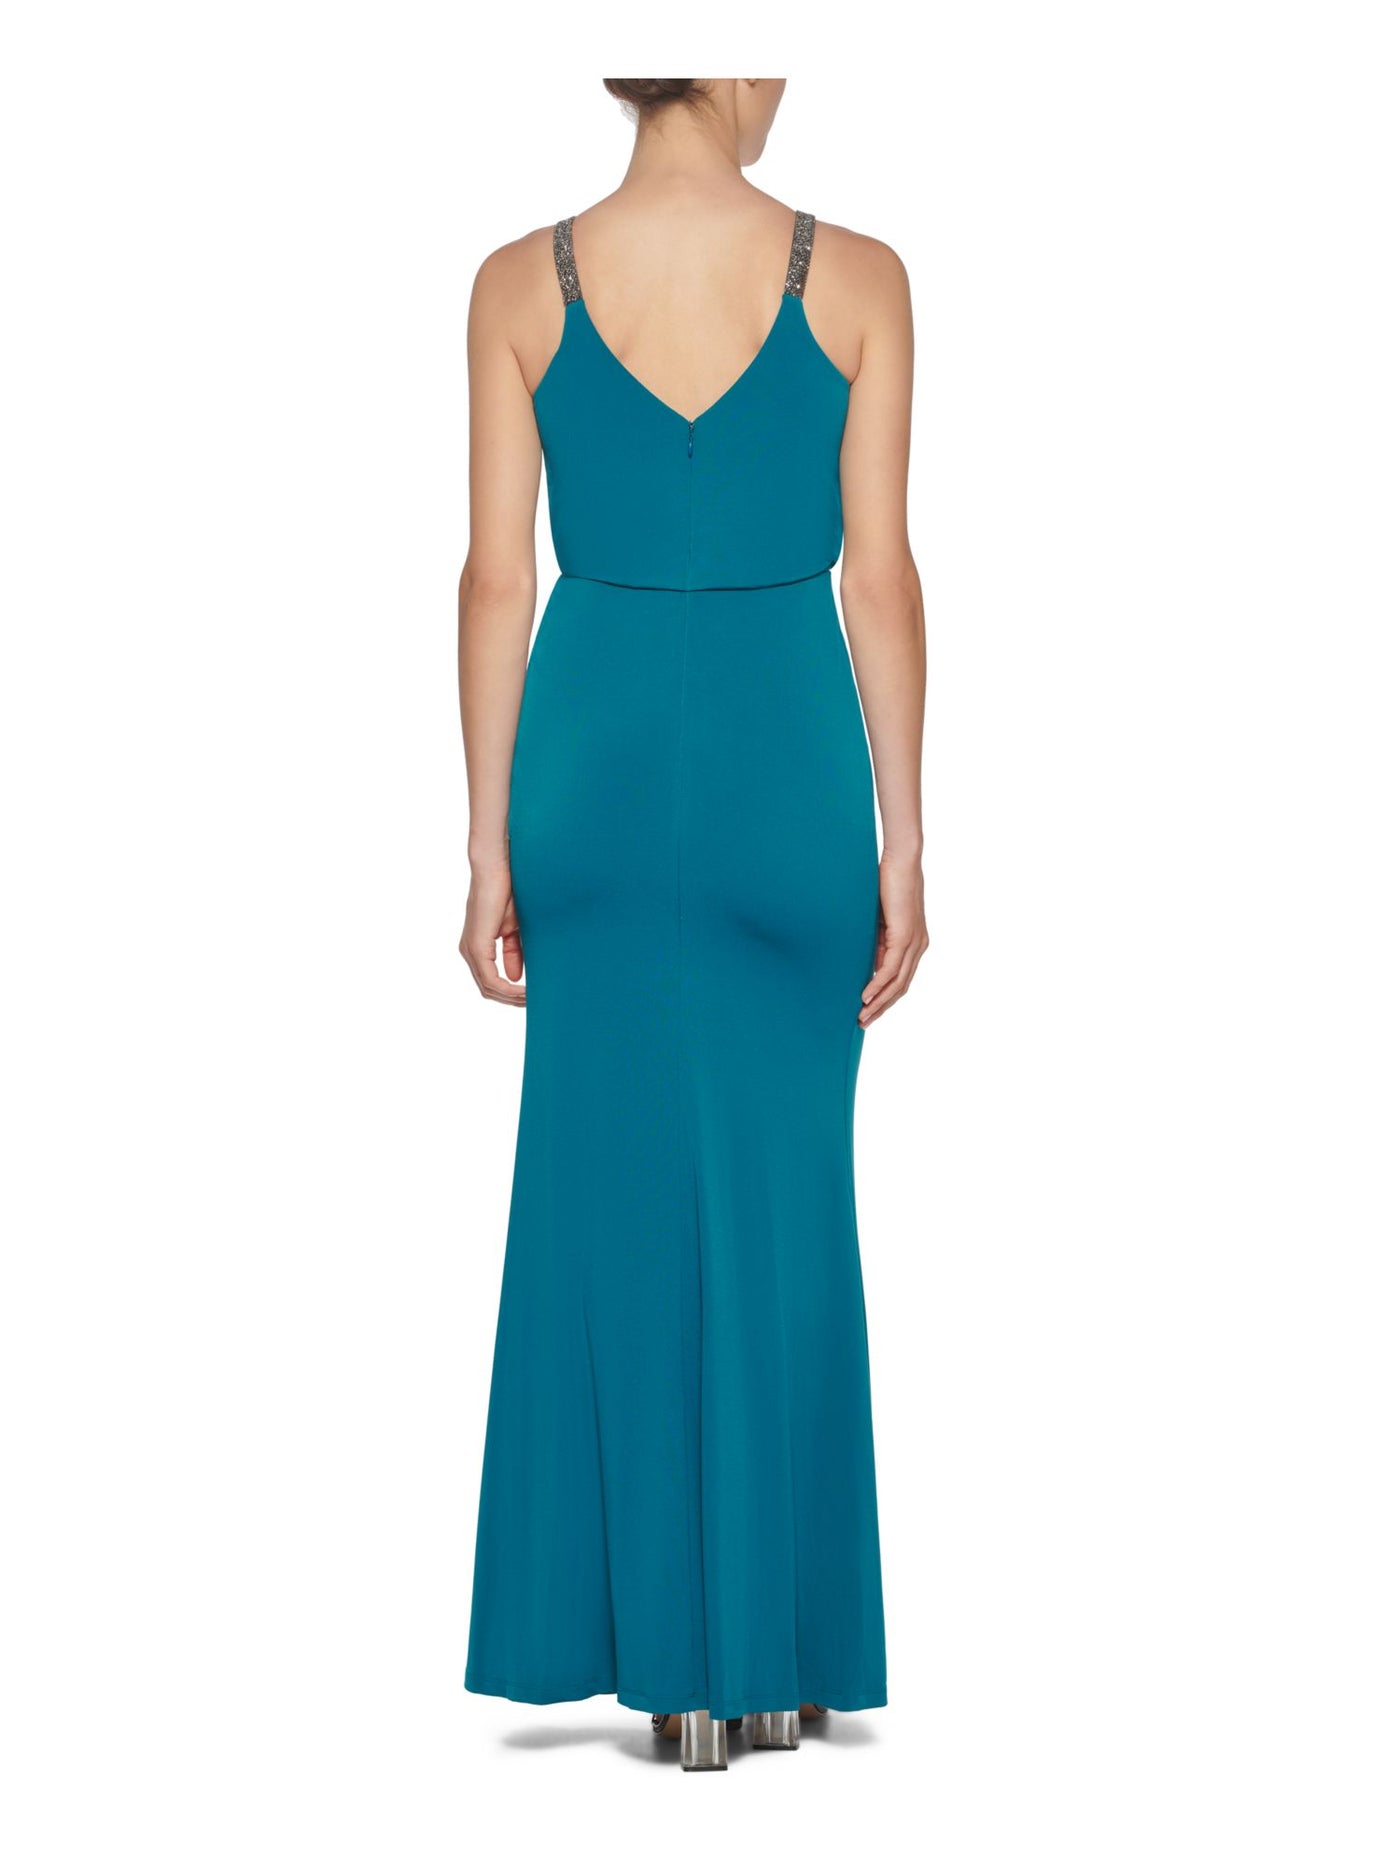 CALVIN KLEIN Womens Teal Stretch Ruched Zippered Embellished Straps Jersey-knit Spaghetti Strap Surplice Neckline Full-Length Cocktail Gown Dress 14